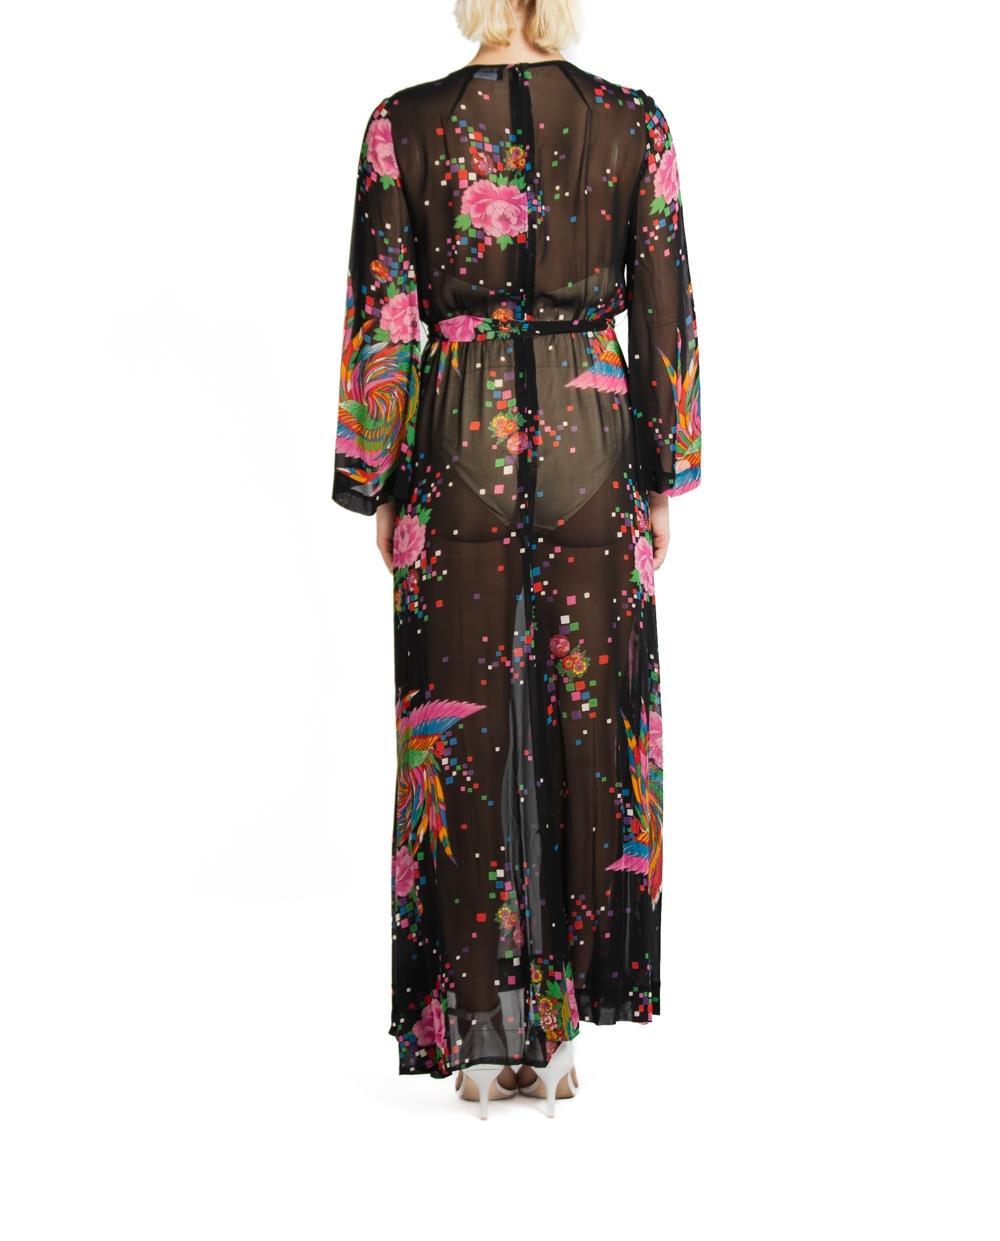 1970S Malcolm Starr Black & Floral Rayon Sheer Dress Made In Italy For Sale 3